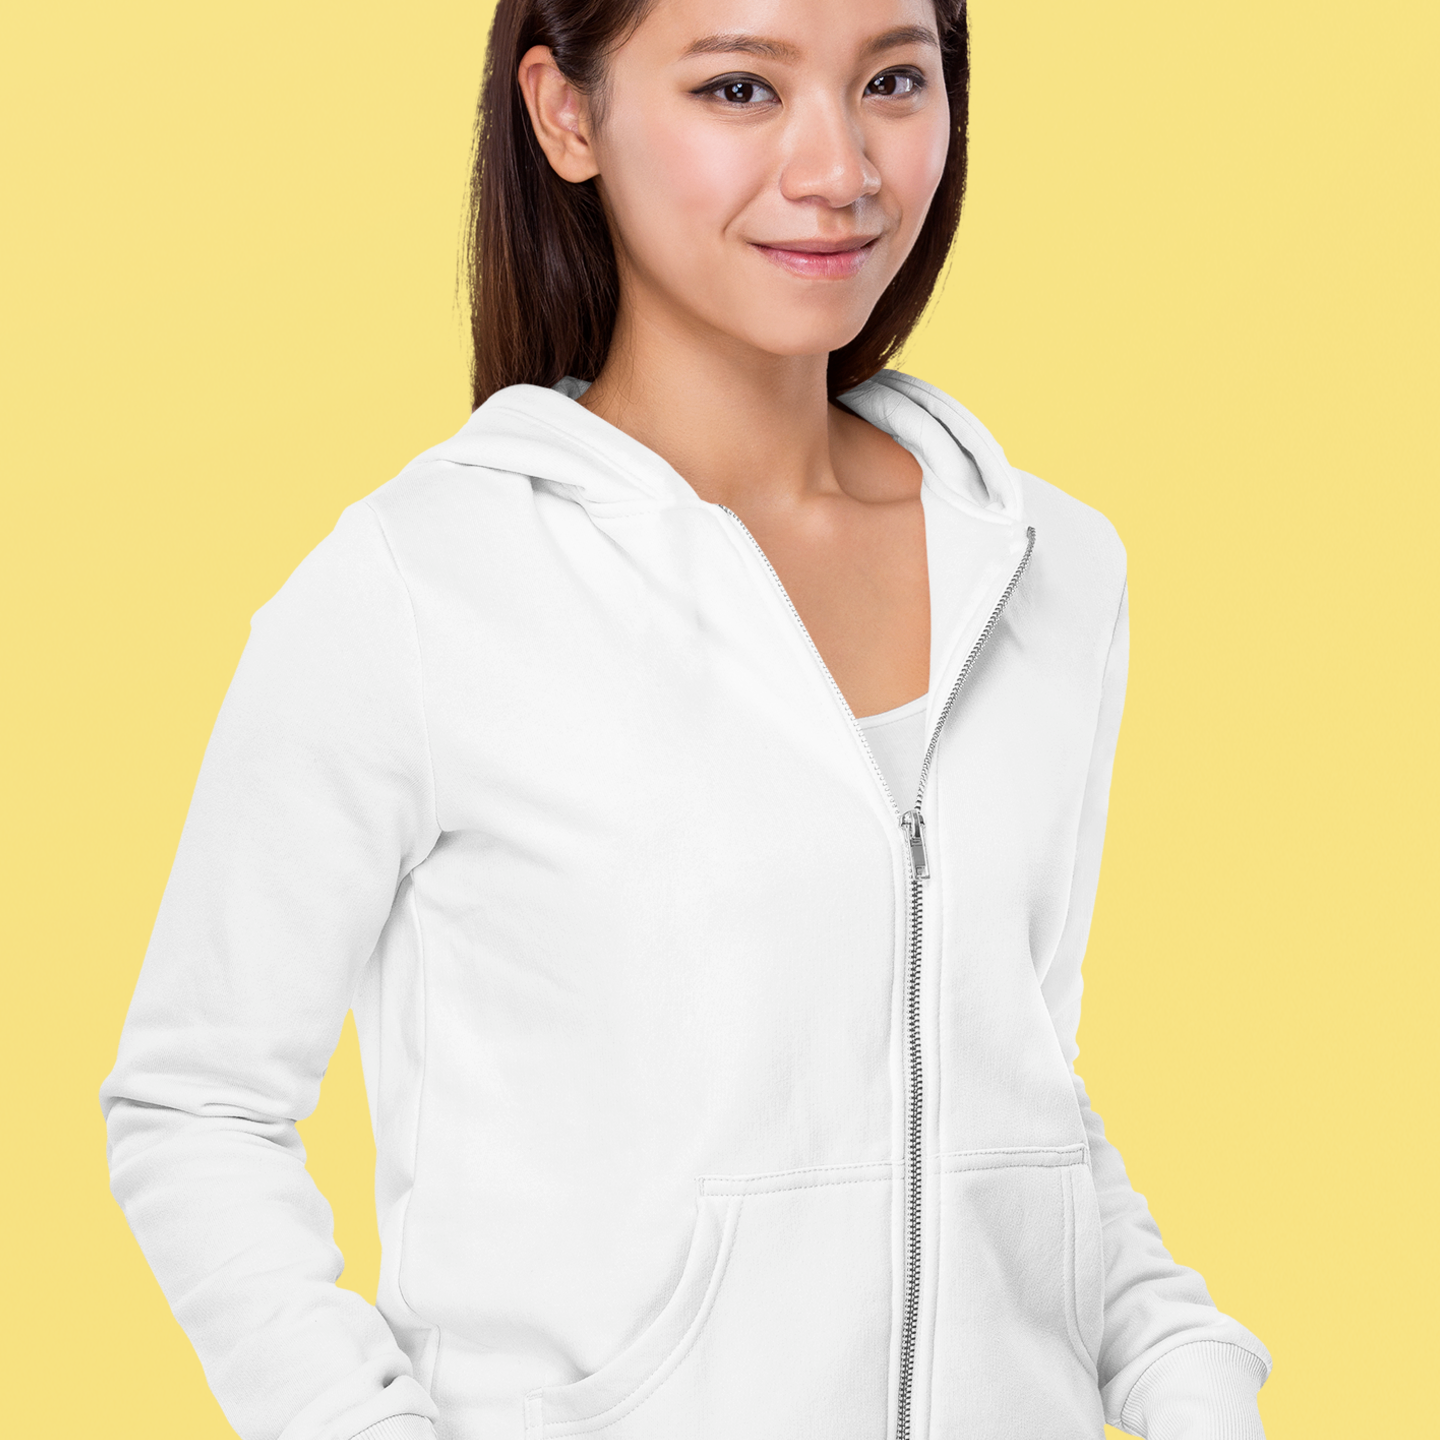 front view of a smiling lady wearing a white zip up hoodie